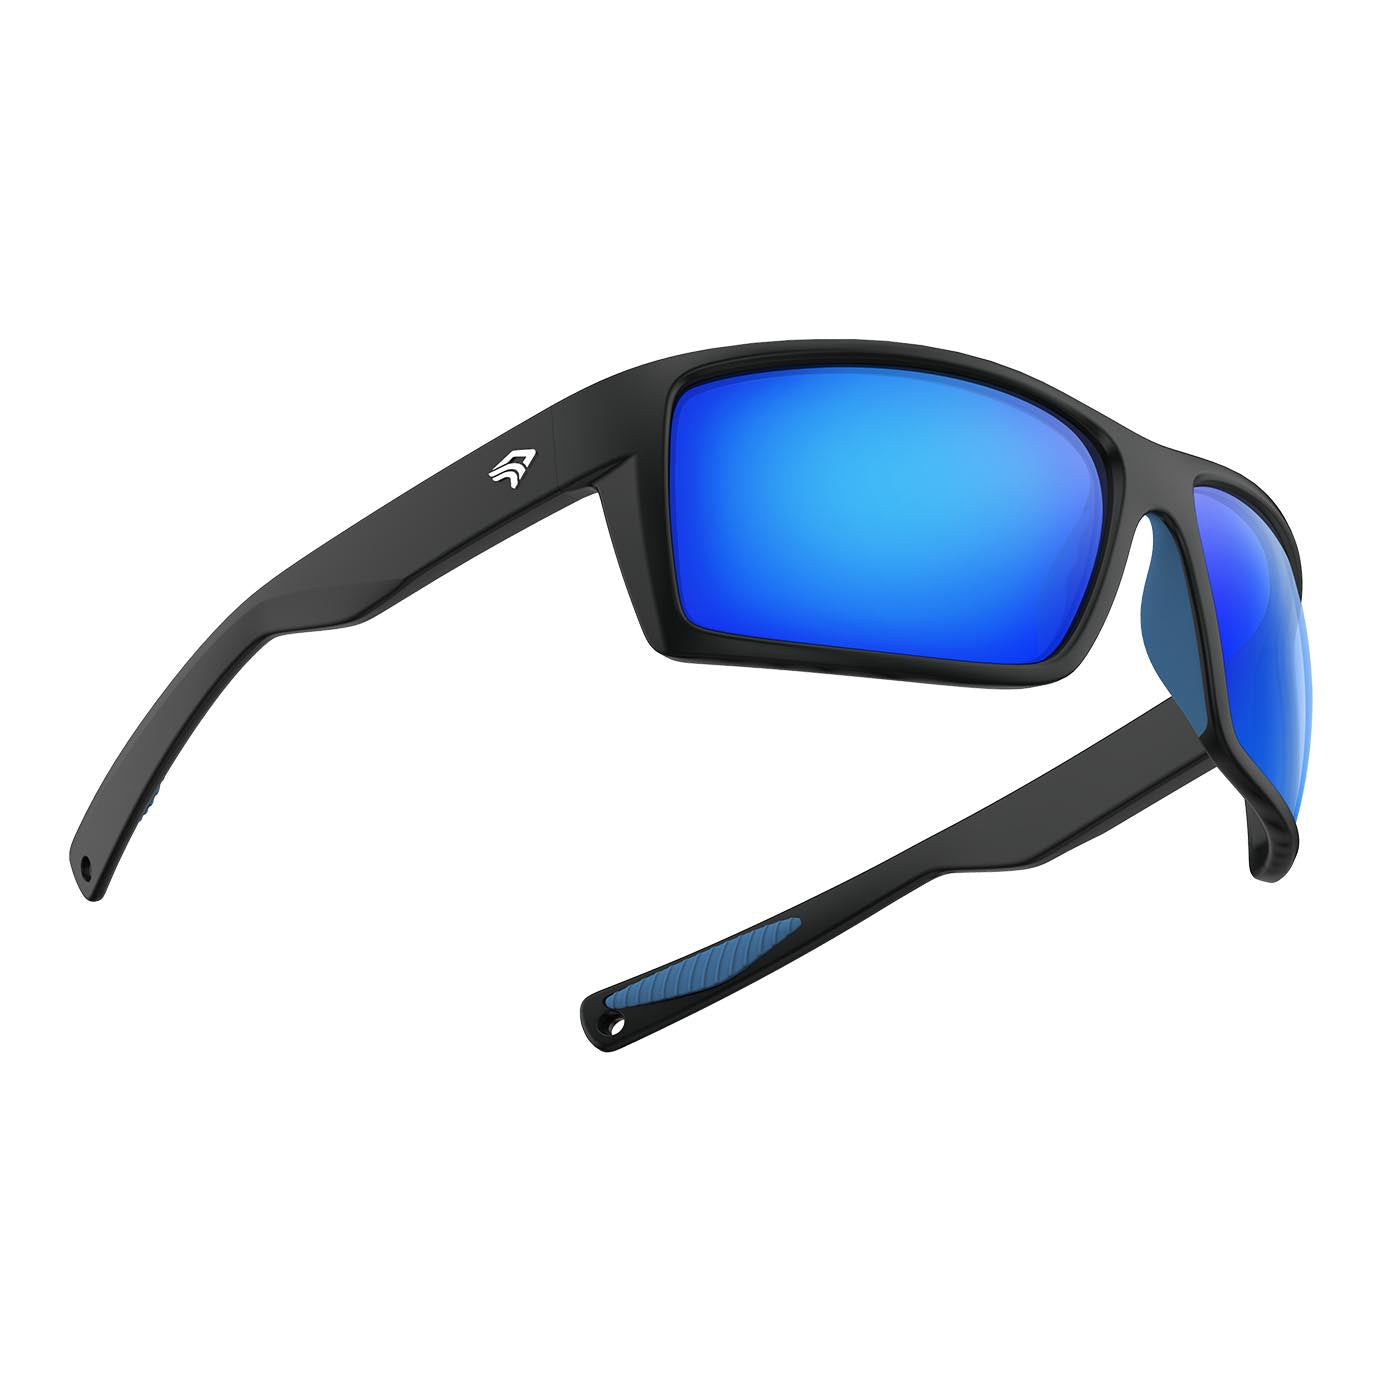 Torege Tolerates Polarized Sports Sunglasses for Men and Women with Lifetime Warranty - Perfect for Fishing, Boating, Beach, Golf, Surf & Driving